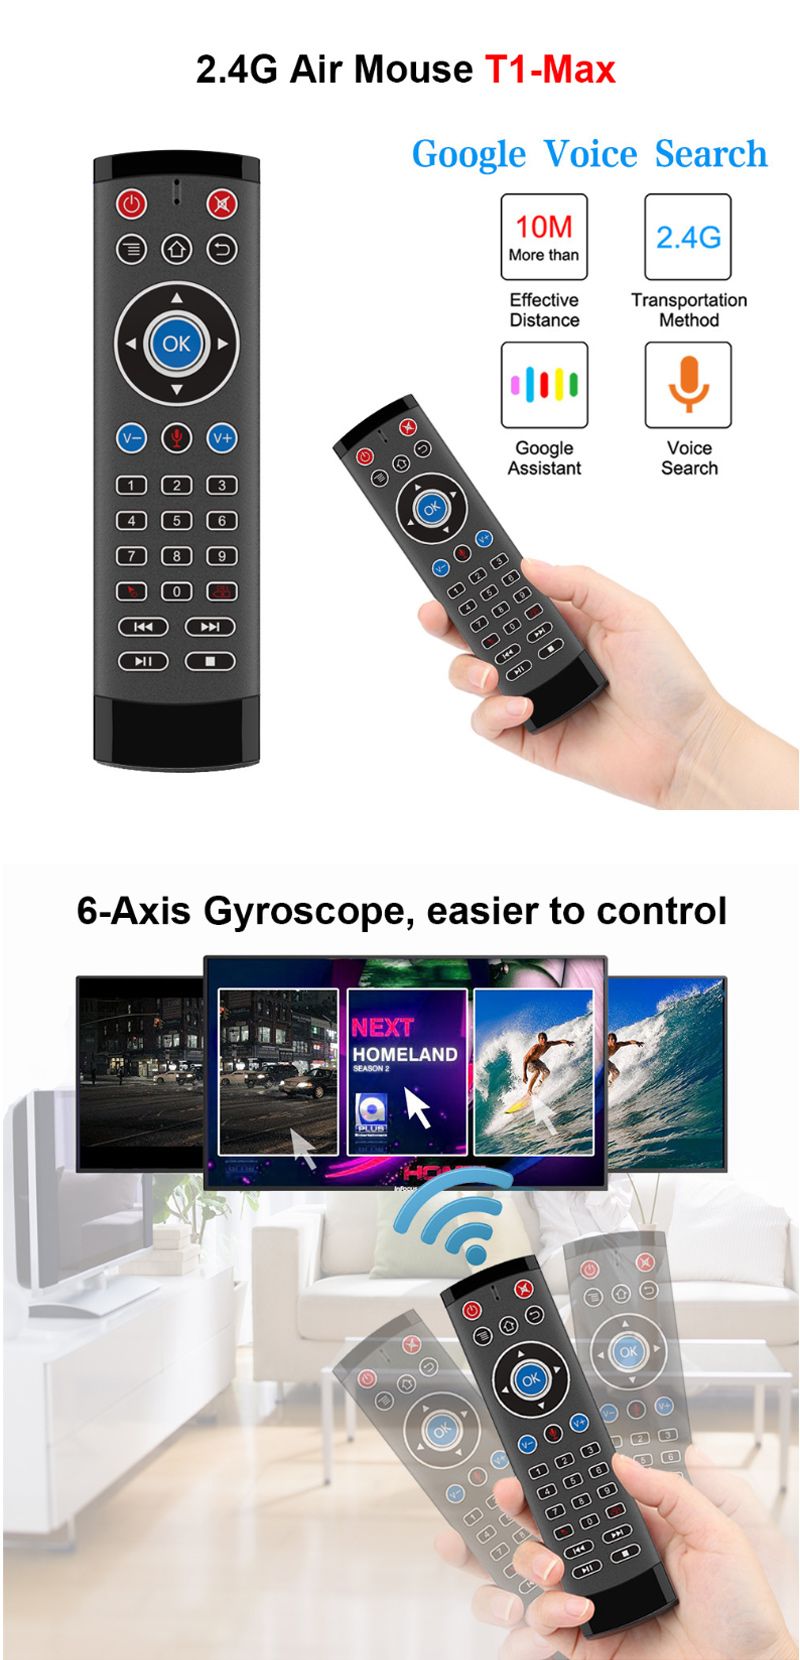 T1-Max-1-24G-Wireless-6-Aixs-Gyroscope-Voice-Remote-Control-IR-Learning-Controller-Air-Mouse-Airmous-1638510